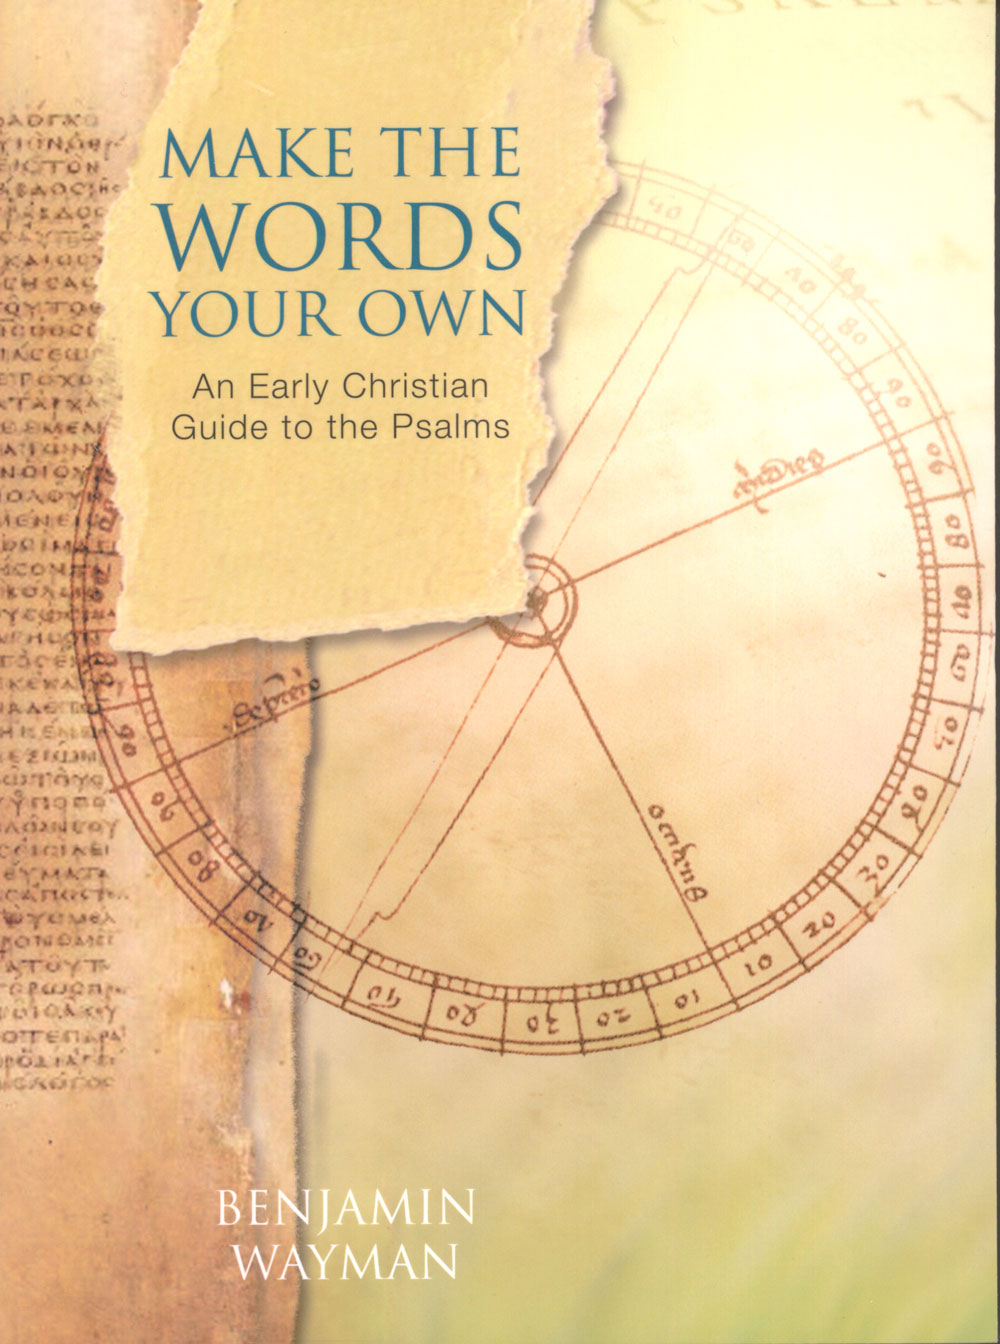 Make the Words Your Own: GC Professor Benjamin Wayman Publishes Guide to the Psalms